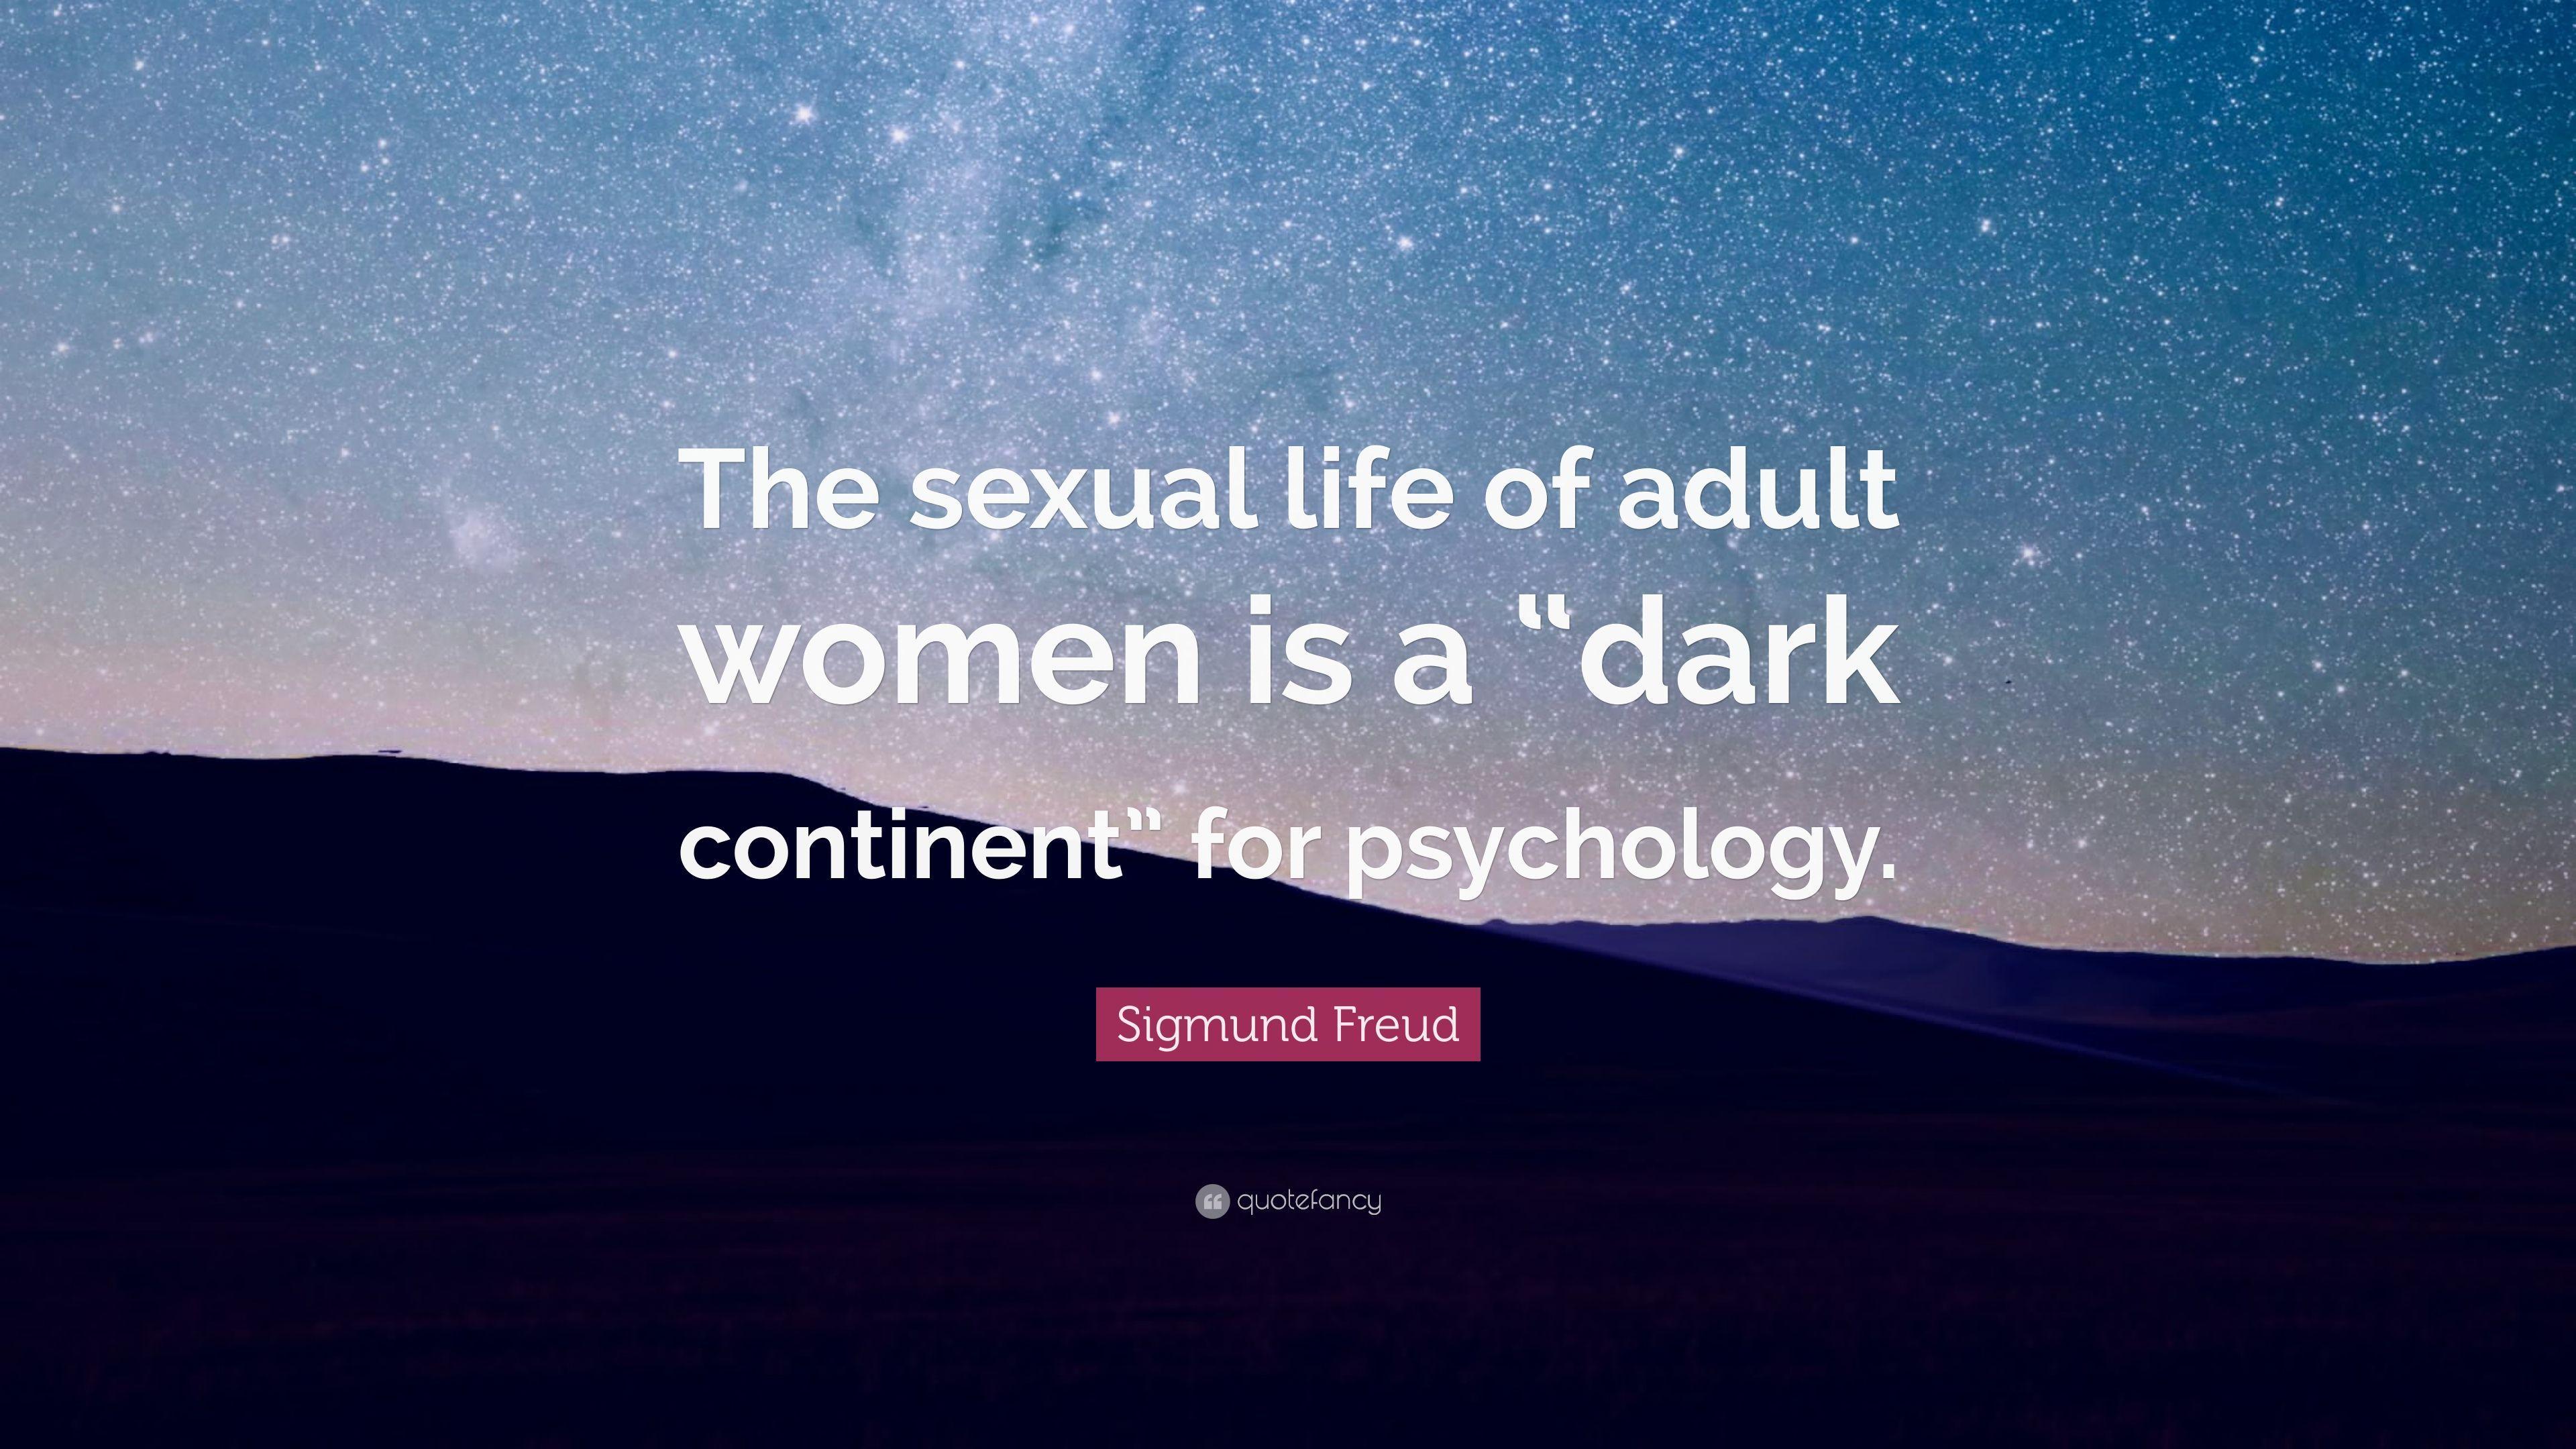 Sigmund Freud Quote: “The sexual life of adult women is a “dark